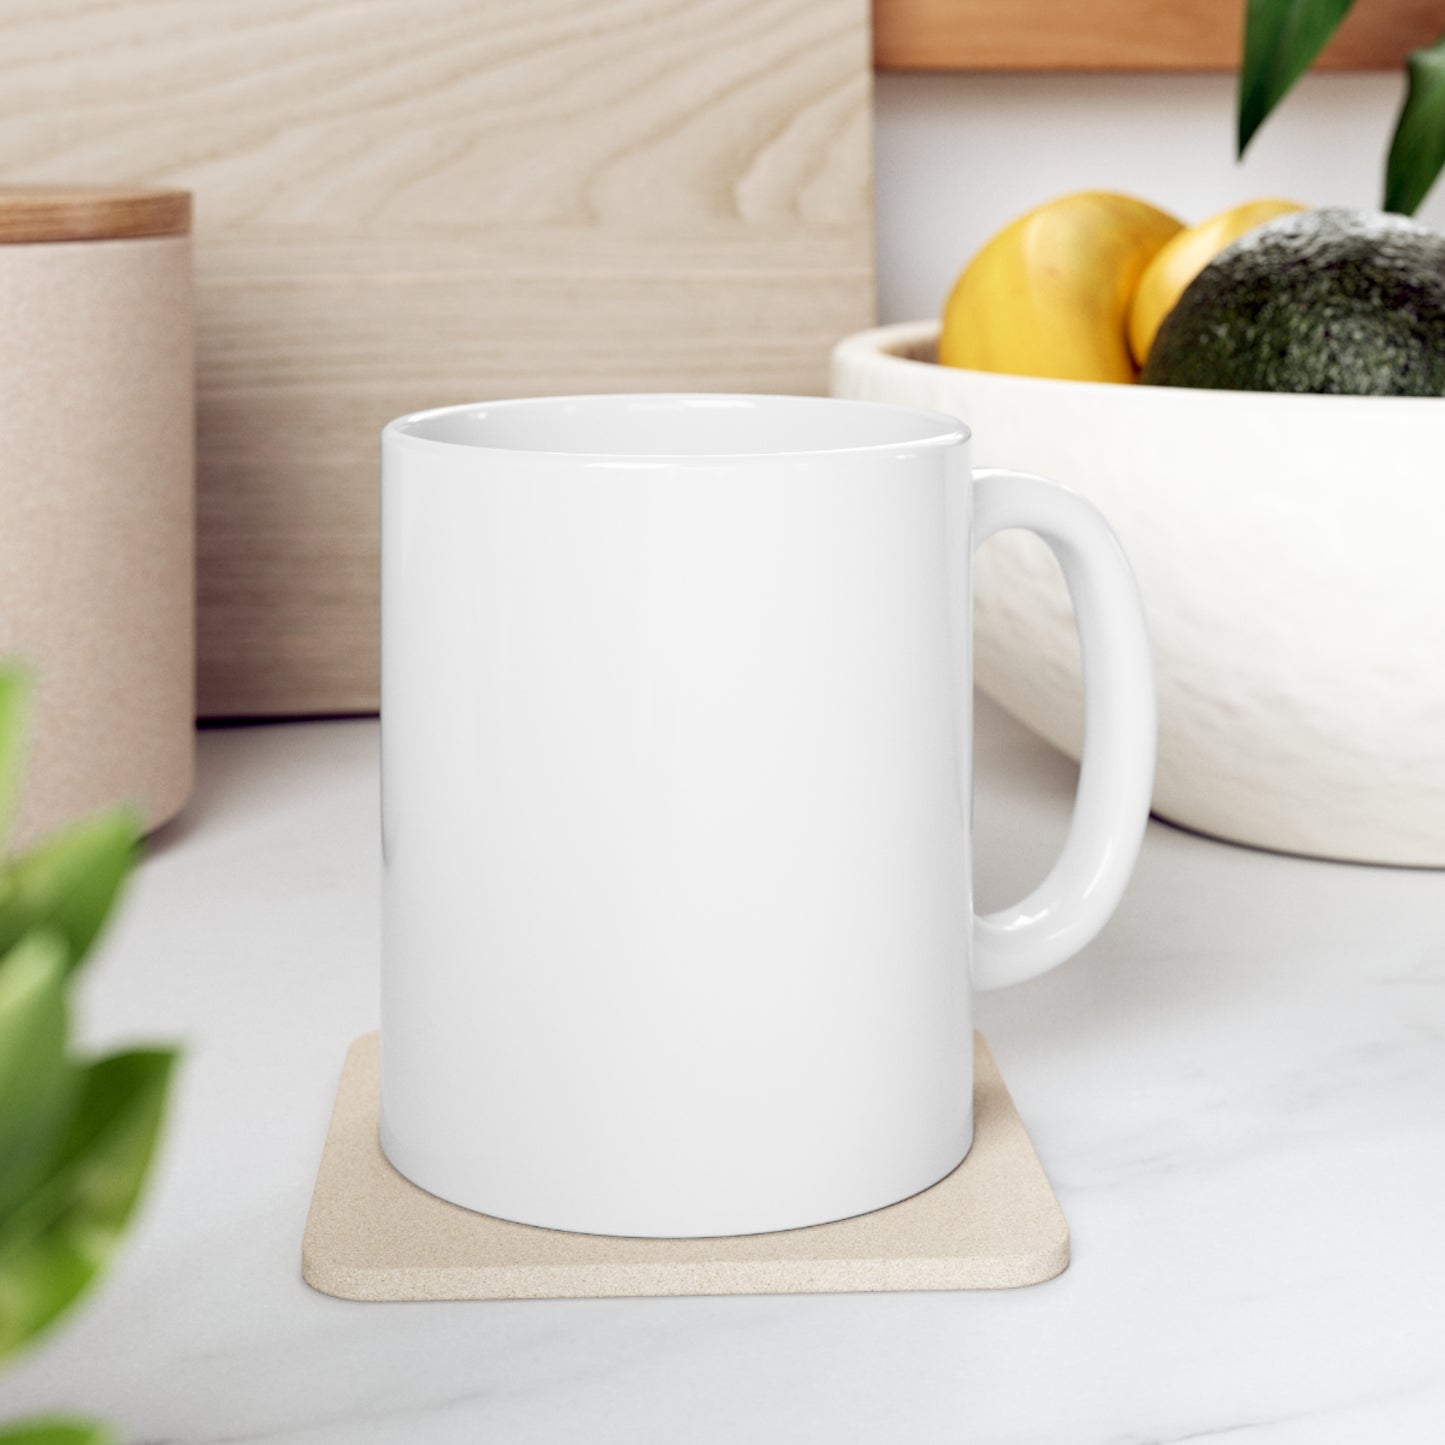 "Perfect Wife" Coffee Mug - Weave Got Gifts - Unique Gifts You Won’t Find Anywhere Else!